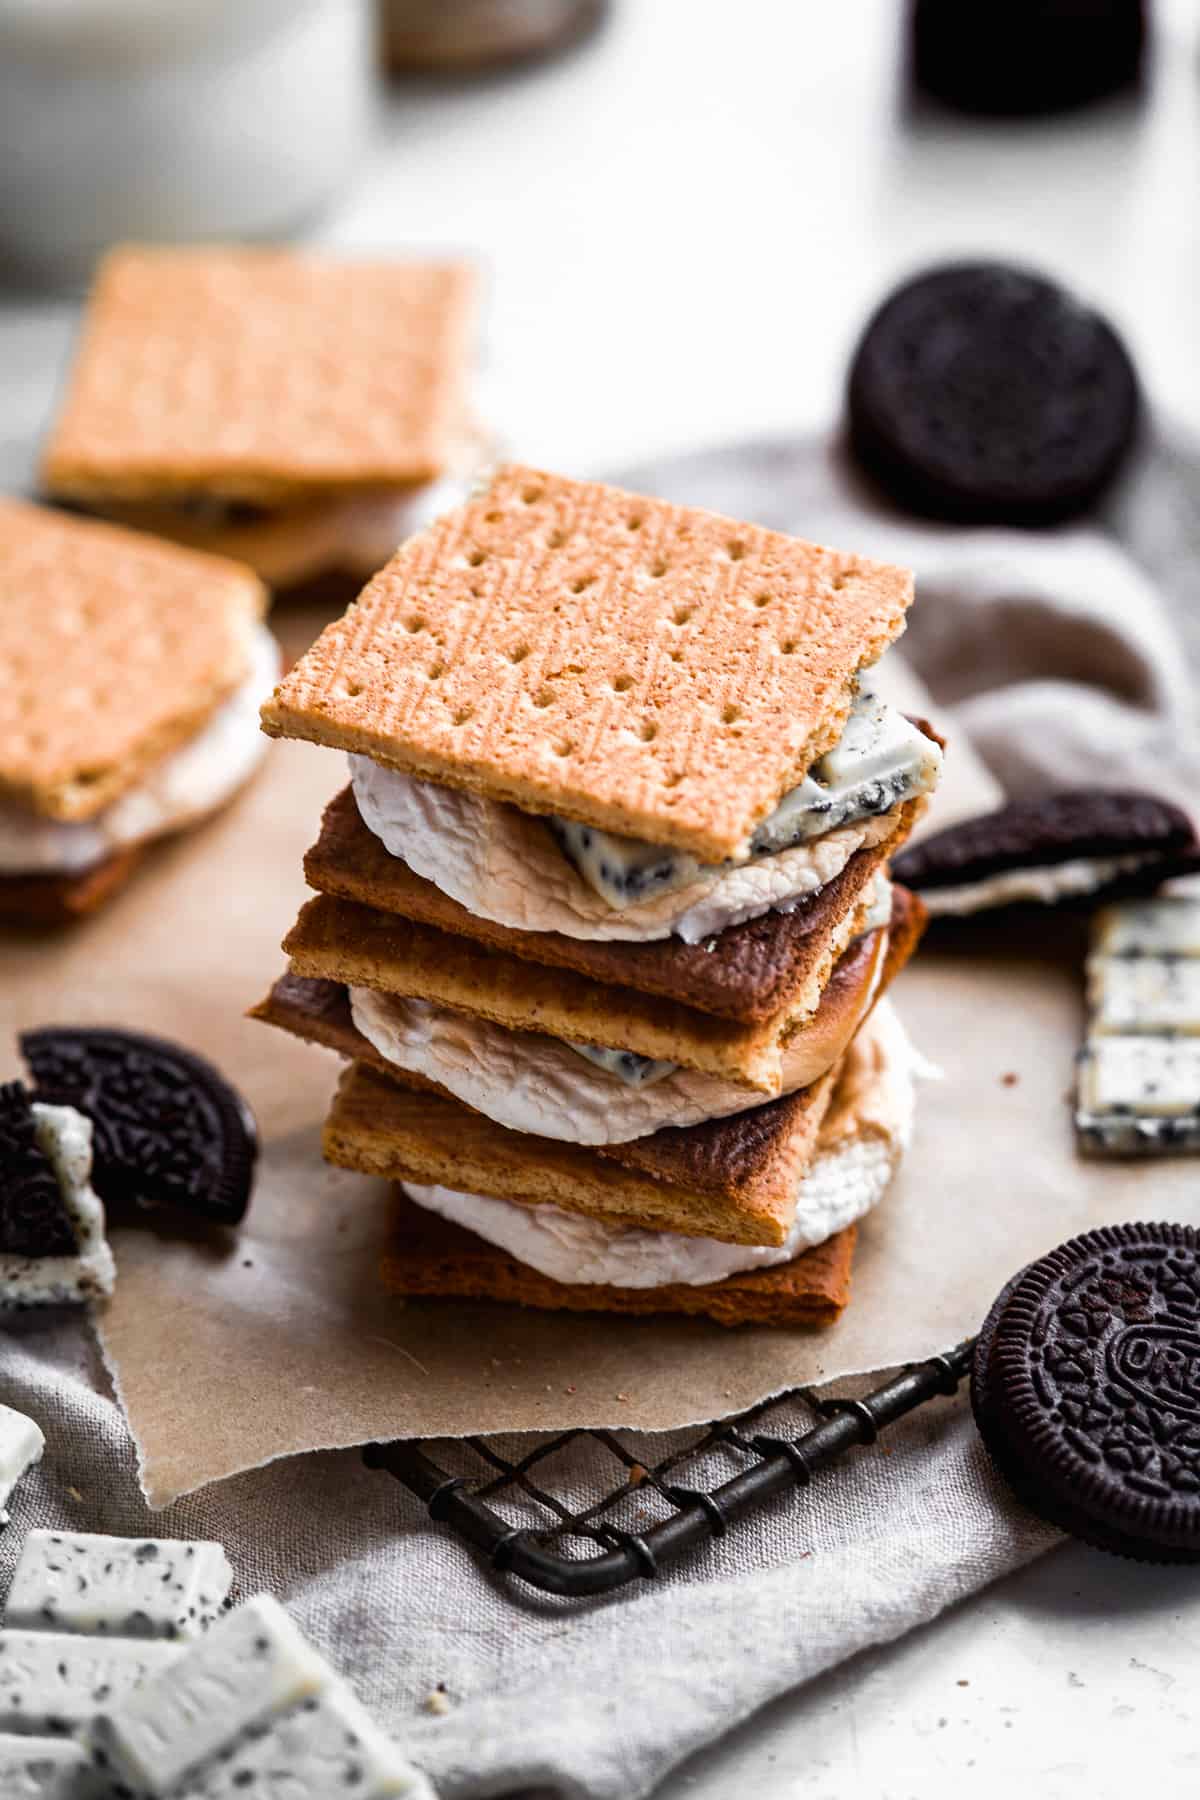 View from above of a stack of three Cookies and Cream Gluten-free S'mores sitting on parchment paper on a metal cooling rack.  Oreo cookies are sitting nearby.  